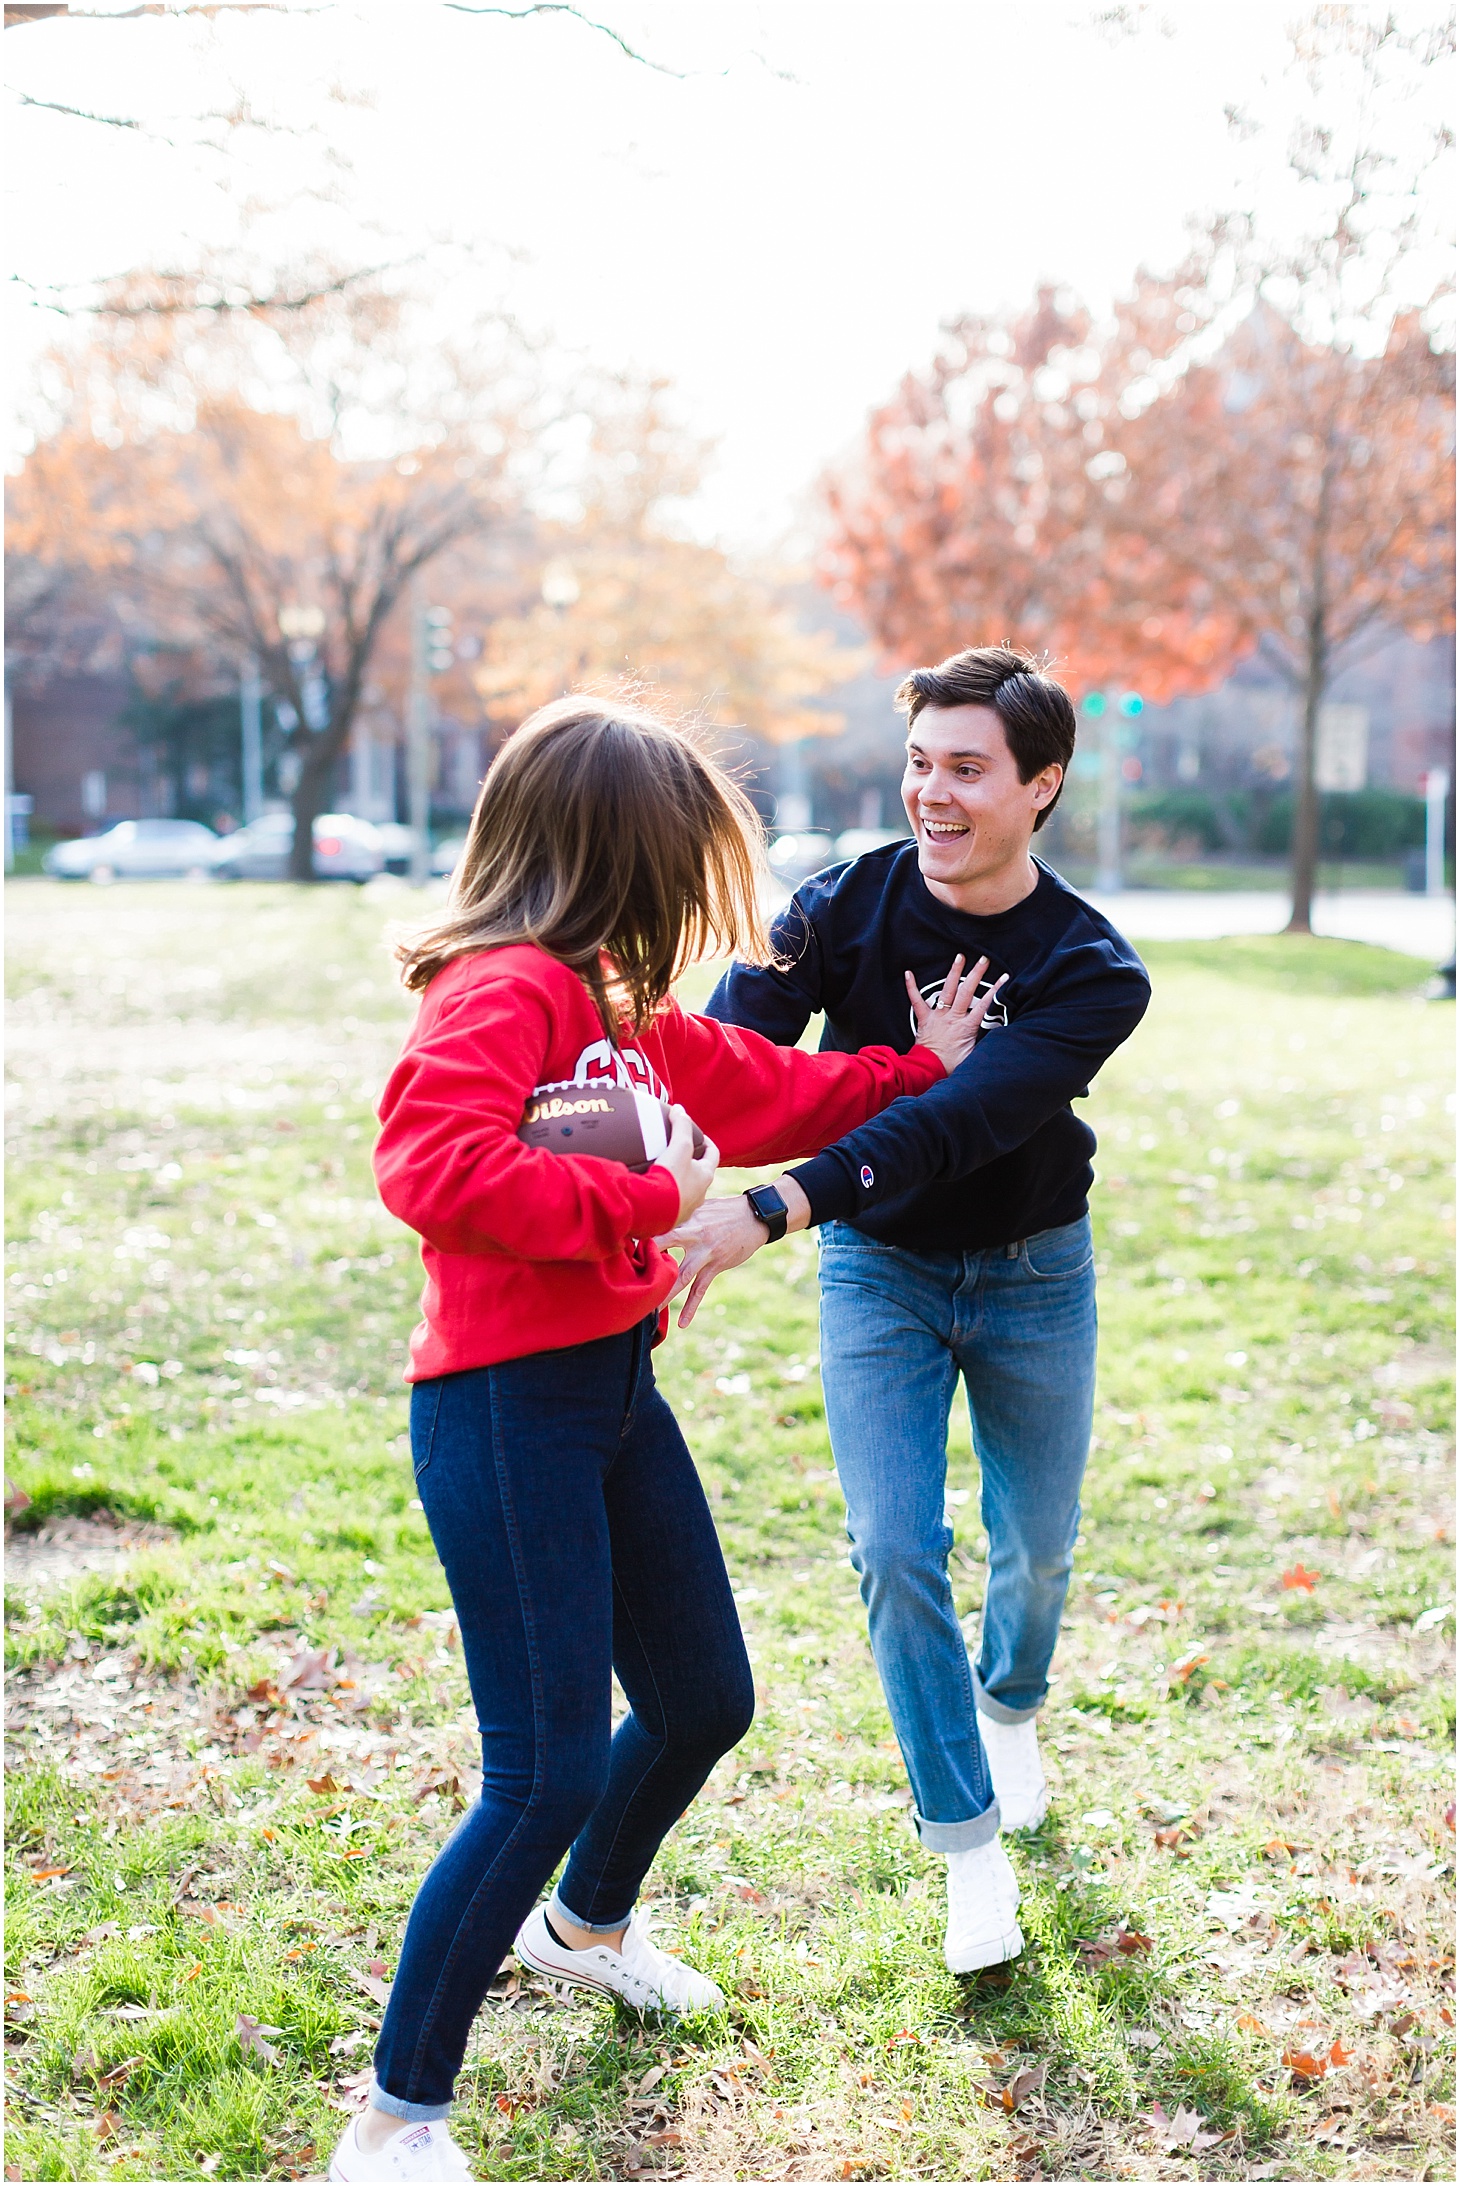 Engagement Portraits with College Shirts, Winter Evening Engagement Session in DC, Sarah Bradshaw Photography, DC Wedding Photographer